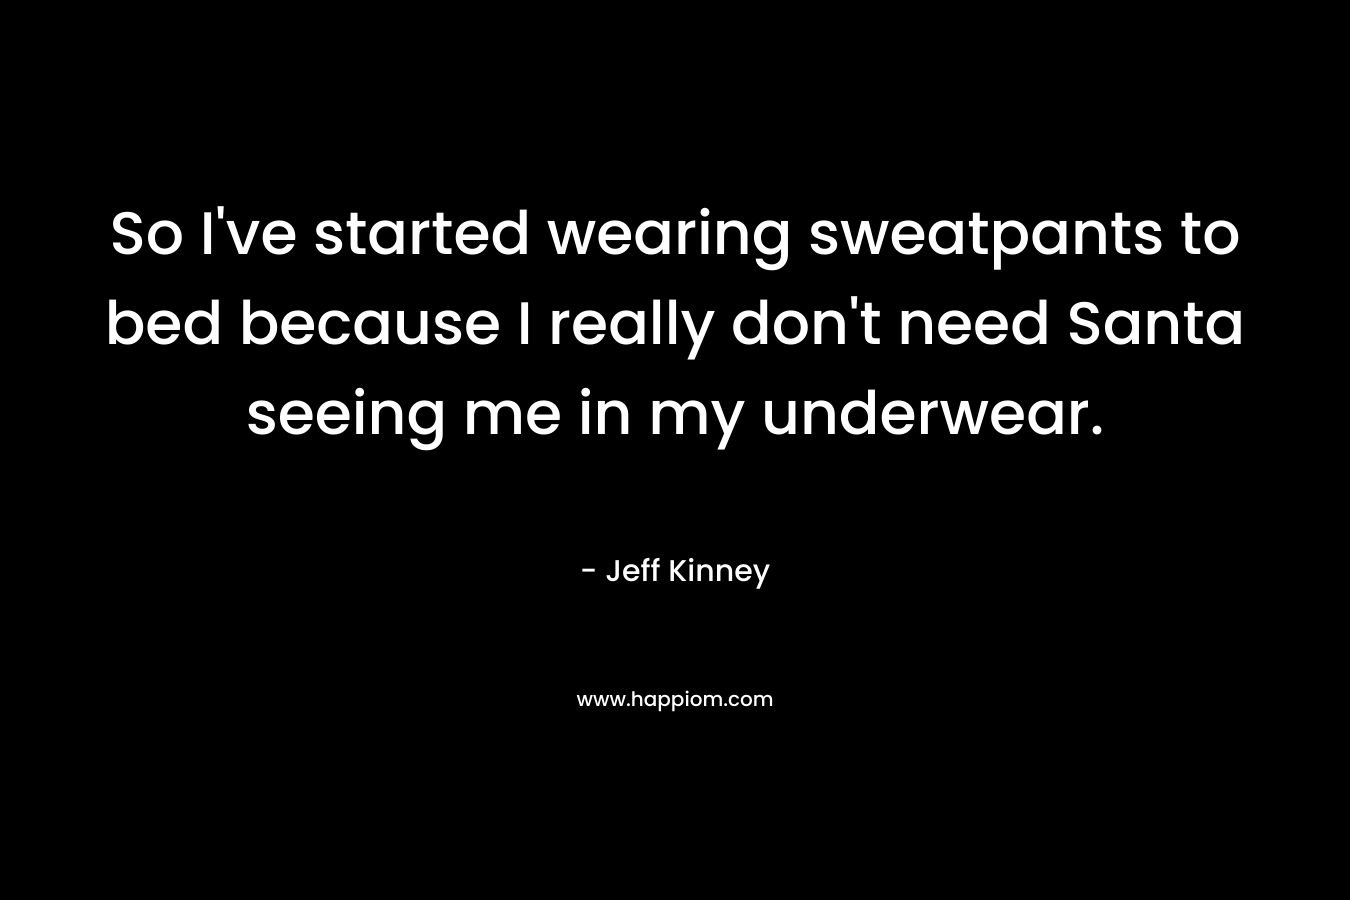 So I’ve started wearing sweatpants to bed because I really don’t need Santa seeing me in my underwear. – Jeff Kinney